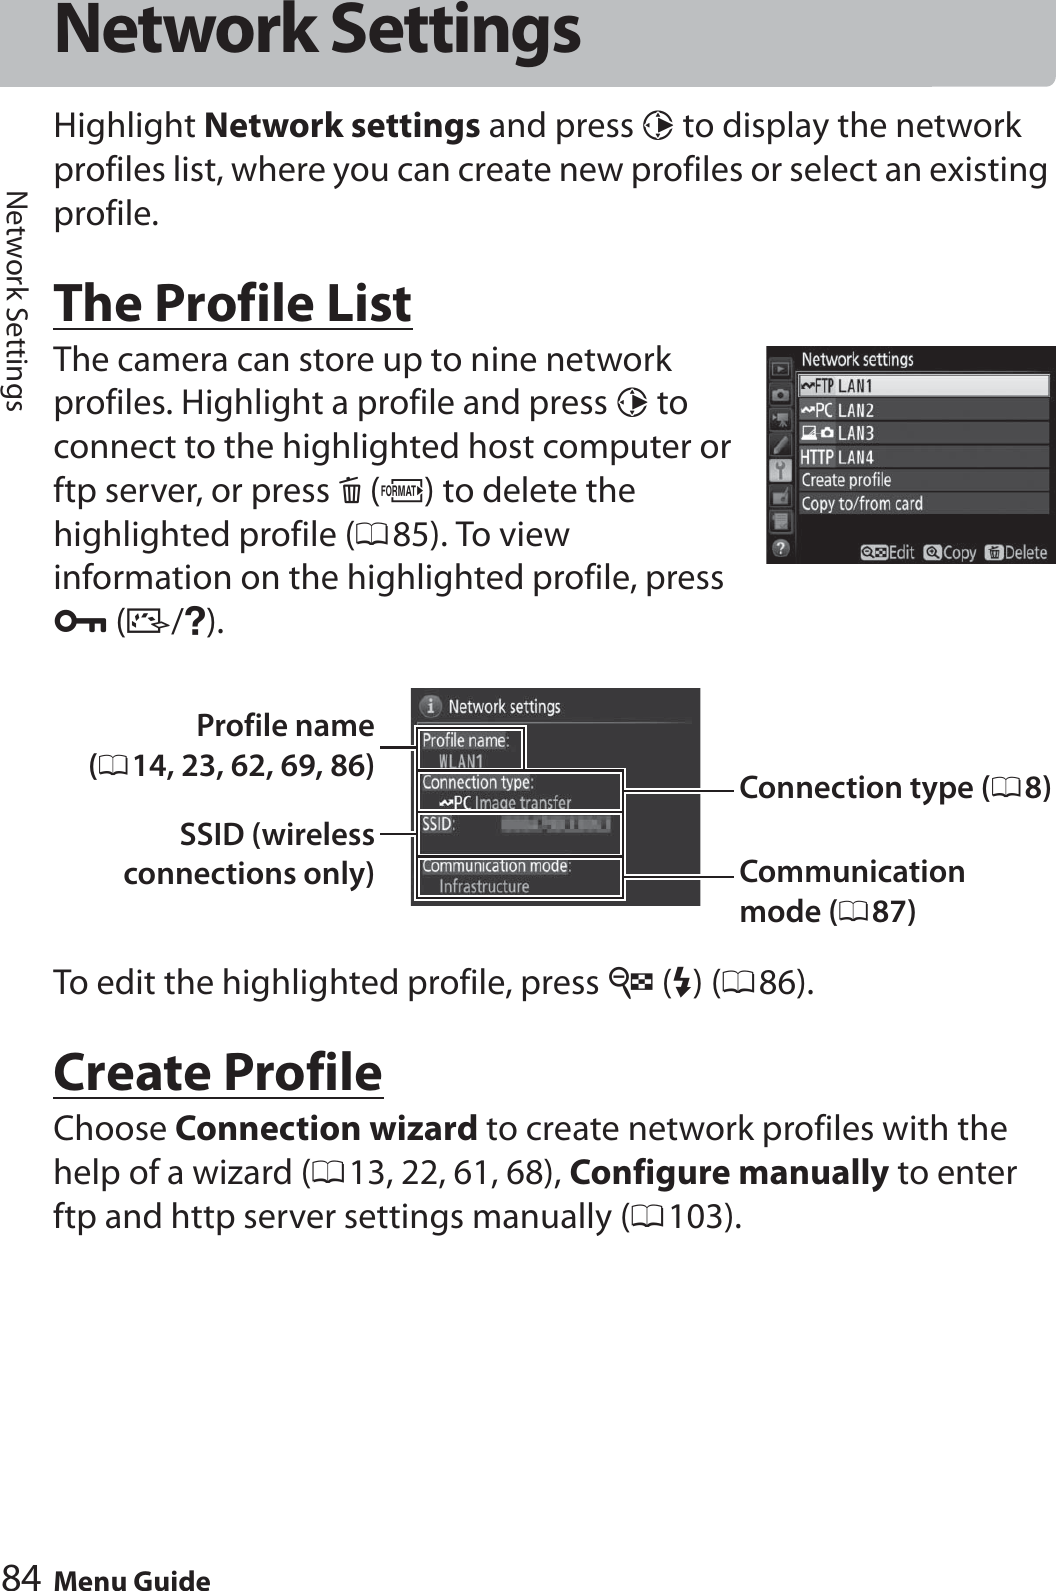 84 Menu GuideNetwork SettingsNetwork SettingsHighlight Network settings and press 2 to display the network profiles list, where you can create new profiles or select an existing profile.The Profile ListThe camera can store up to nine network profiles. Highlight a profile and press 2 to connect to the highlighted host computer or ftp server, or press O (Q) to delete the highlighted profile (085). To view information on the highlighted profile, press L (Z/Q).To edit the highlighted profile, press W (M) (086).Create ProfileChoose Connection wizard to create network profiles with the help of a wizard (013, 22, 61, 68), Configure manually to enter ftp and http server settings manually (0103).Connection type (08)Profile name(014, 23, 62, 69, 86)SSID (wirelessconnections only) Communication mode (087)